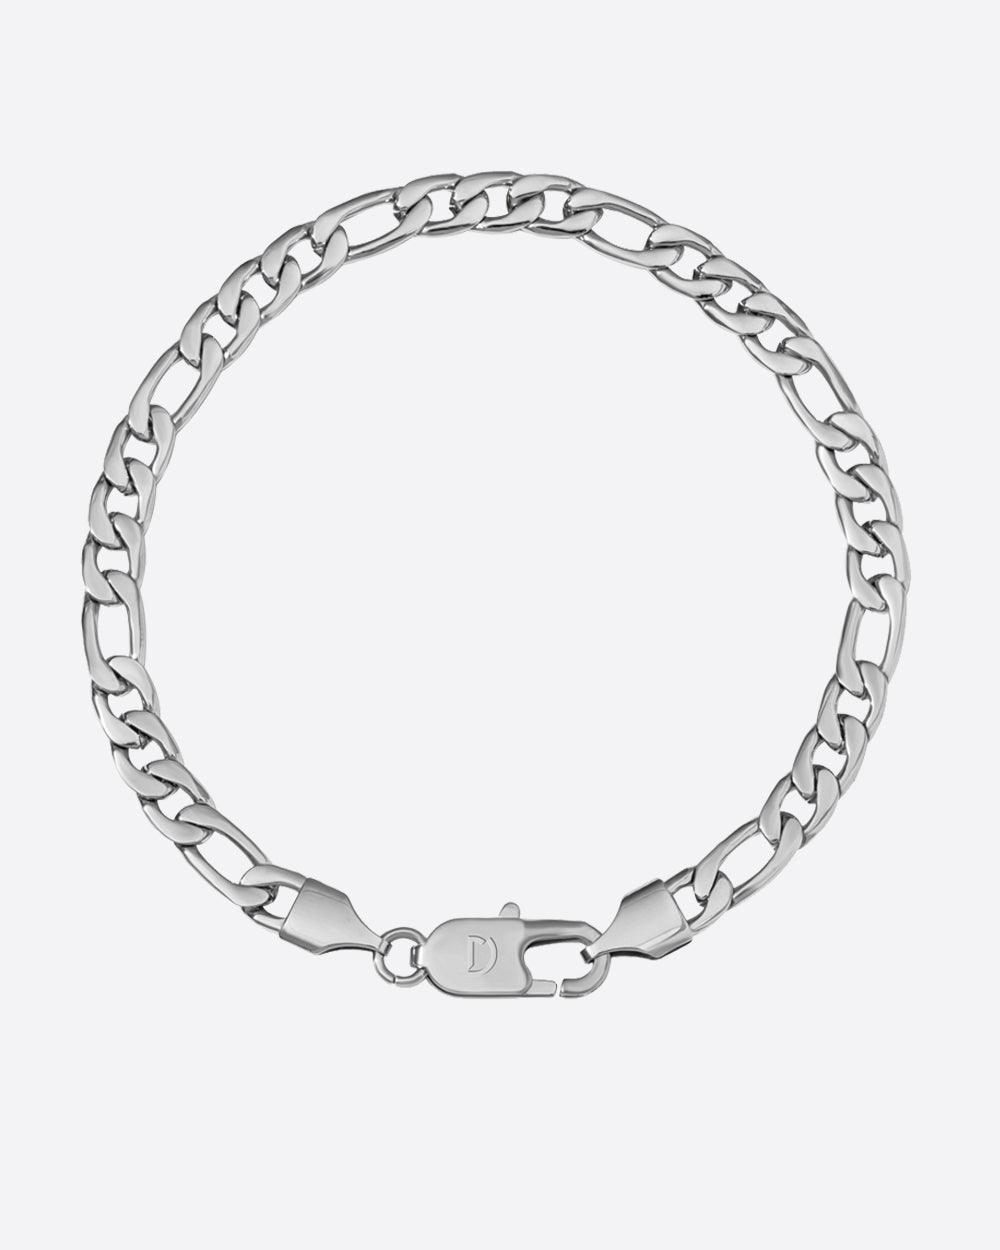 CLEAN FIGARO BRACELET. - 5MM WHITE GOLD - DRIP IN THE JEWEL